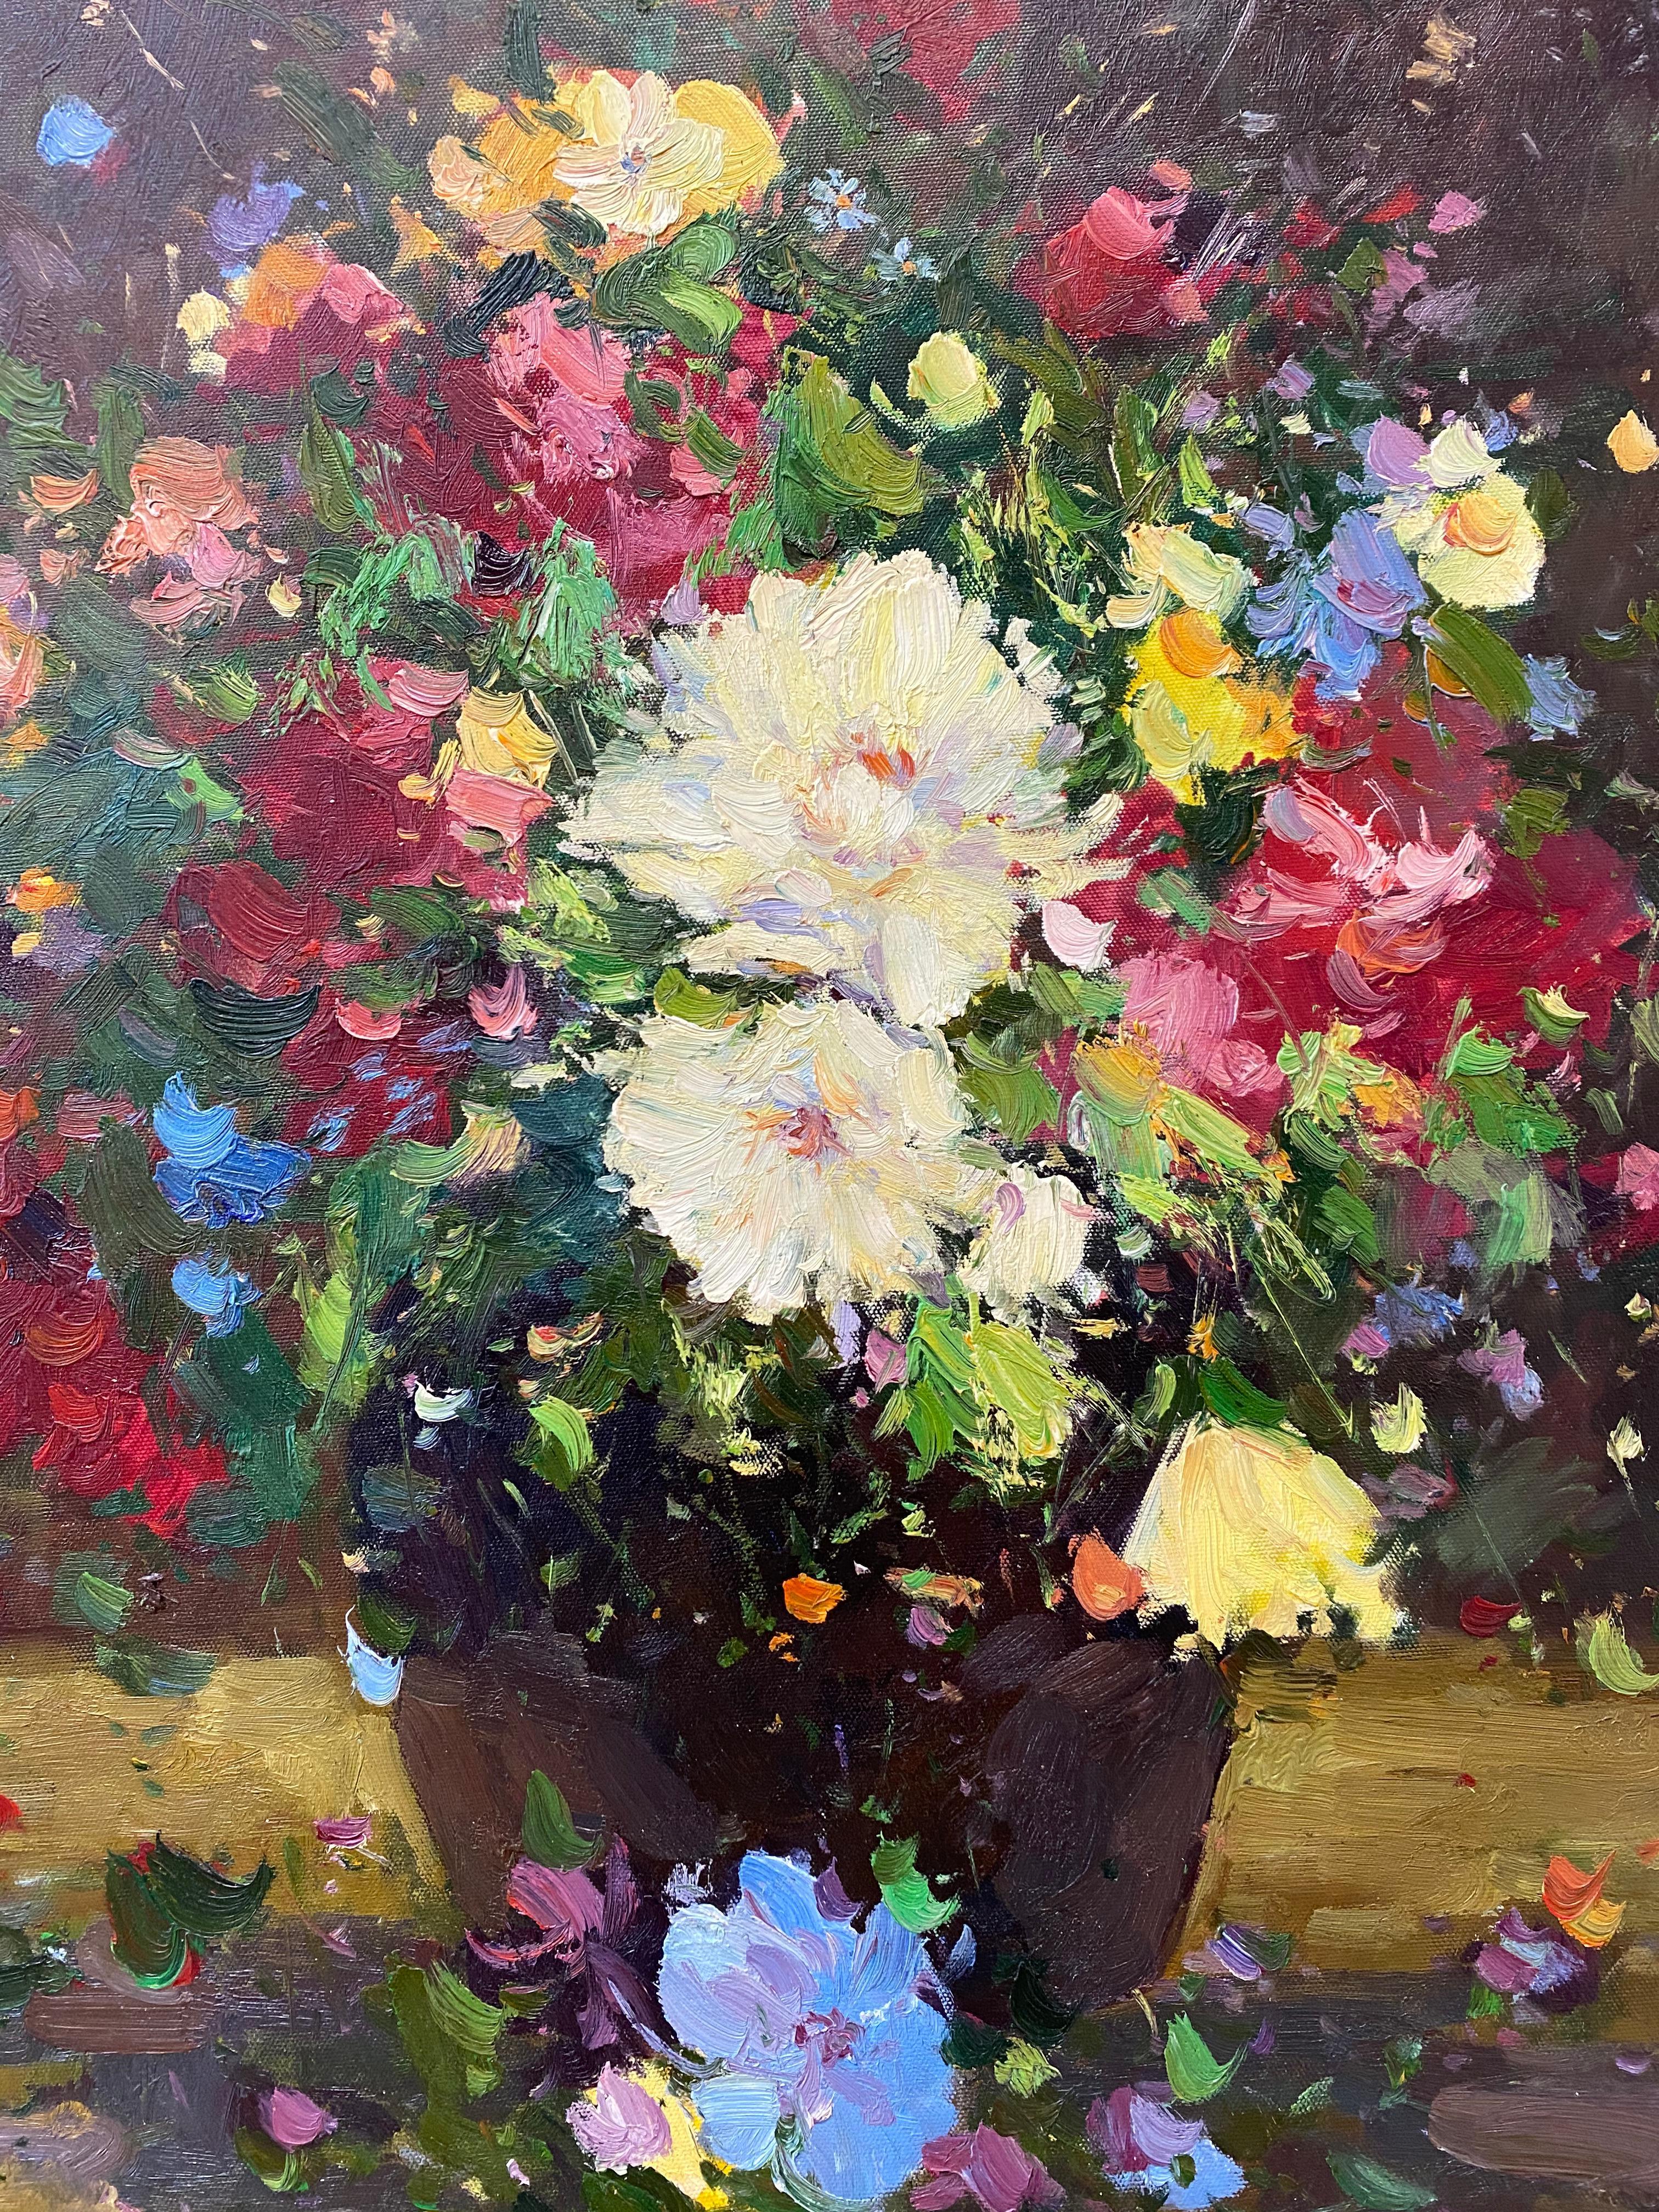 Contemporary Floral Still Life Oil Painting 21st Century

Gorgeous painting by a mystery artist. No visible signature

Original oil on canvas

Dimensions 20